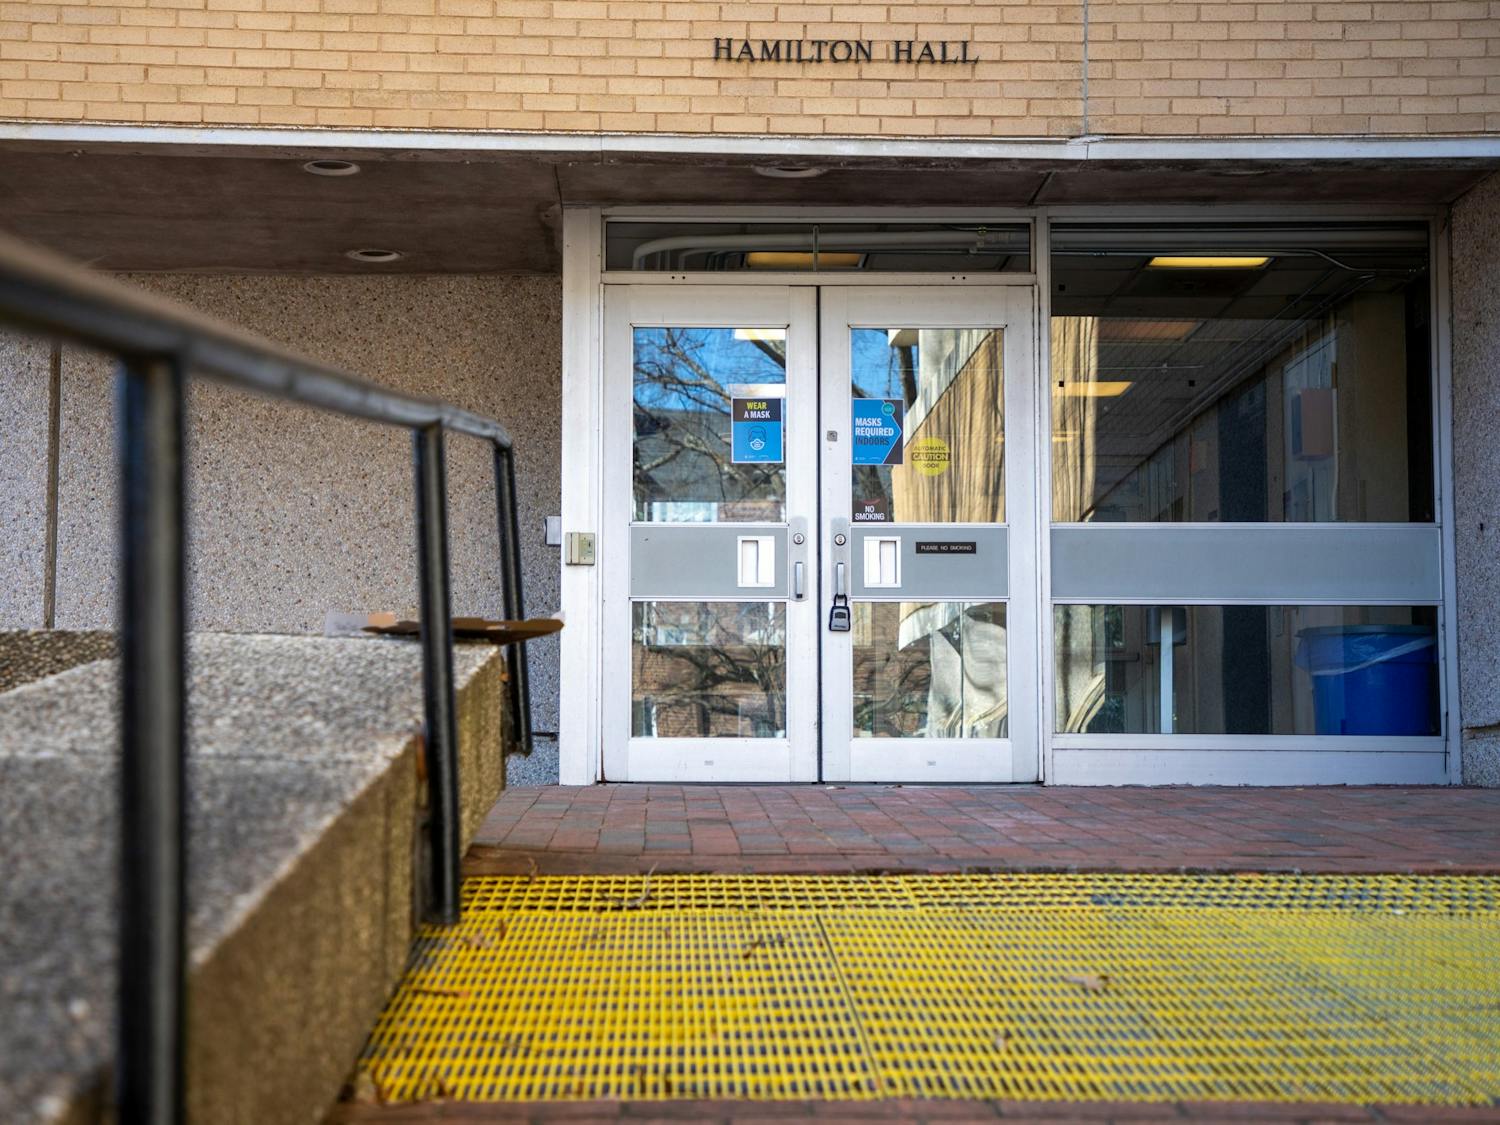 Hamilton Hall is pictured on Monday, Feb. 14, 2022. The process to rename Hamilton Hall "Pauli Murray Hall," initiated by the History, Sociology, Political Science, and Peace, War, and Defense departments in 2020, is still underway.